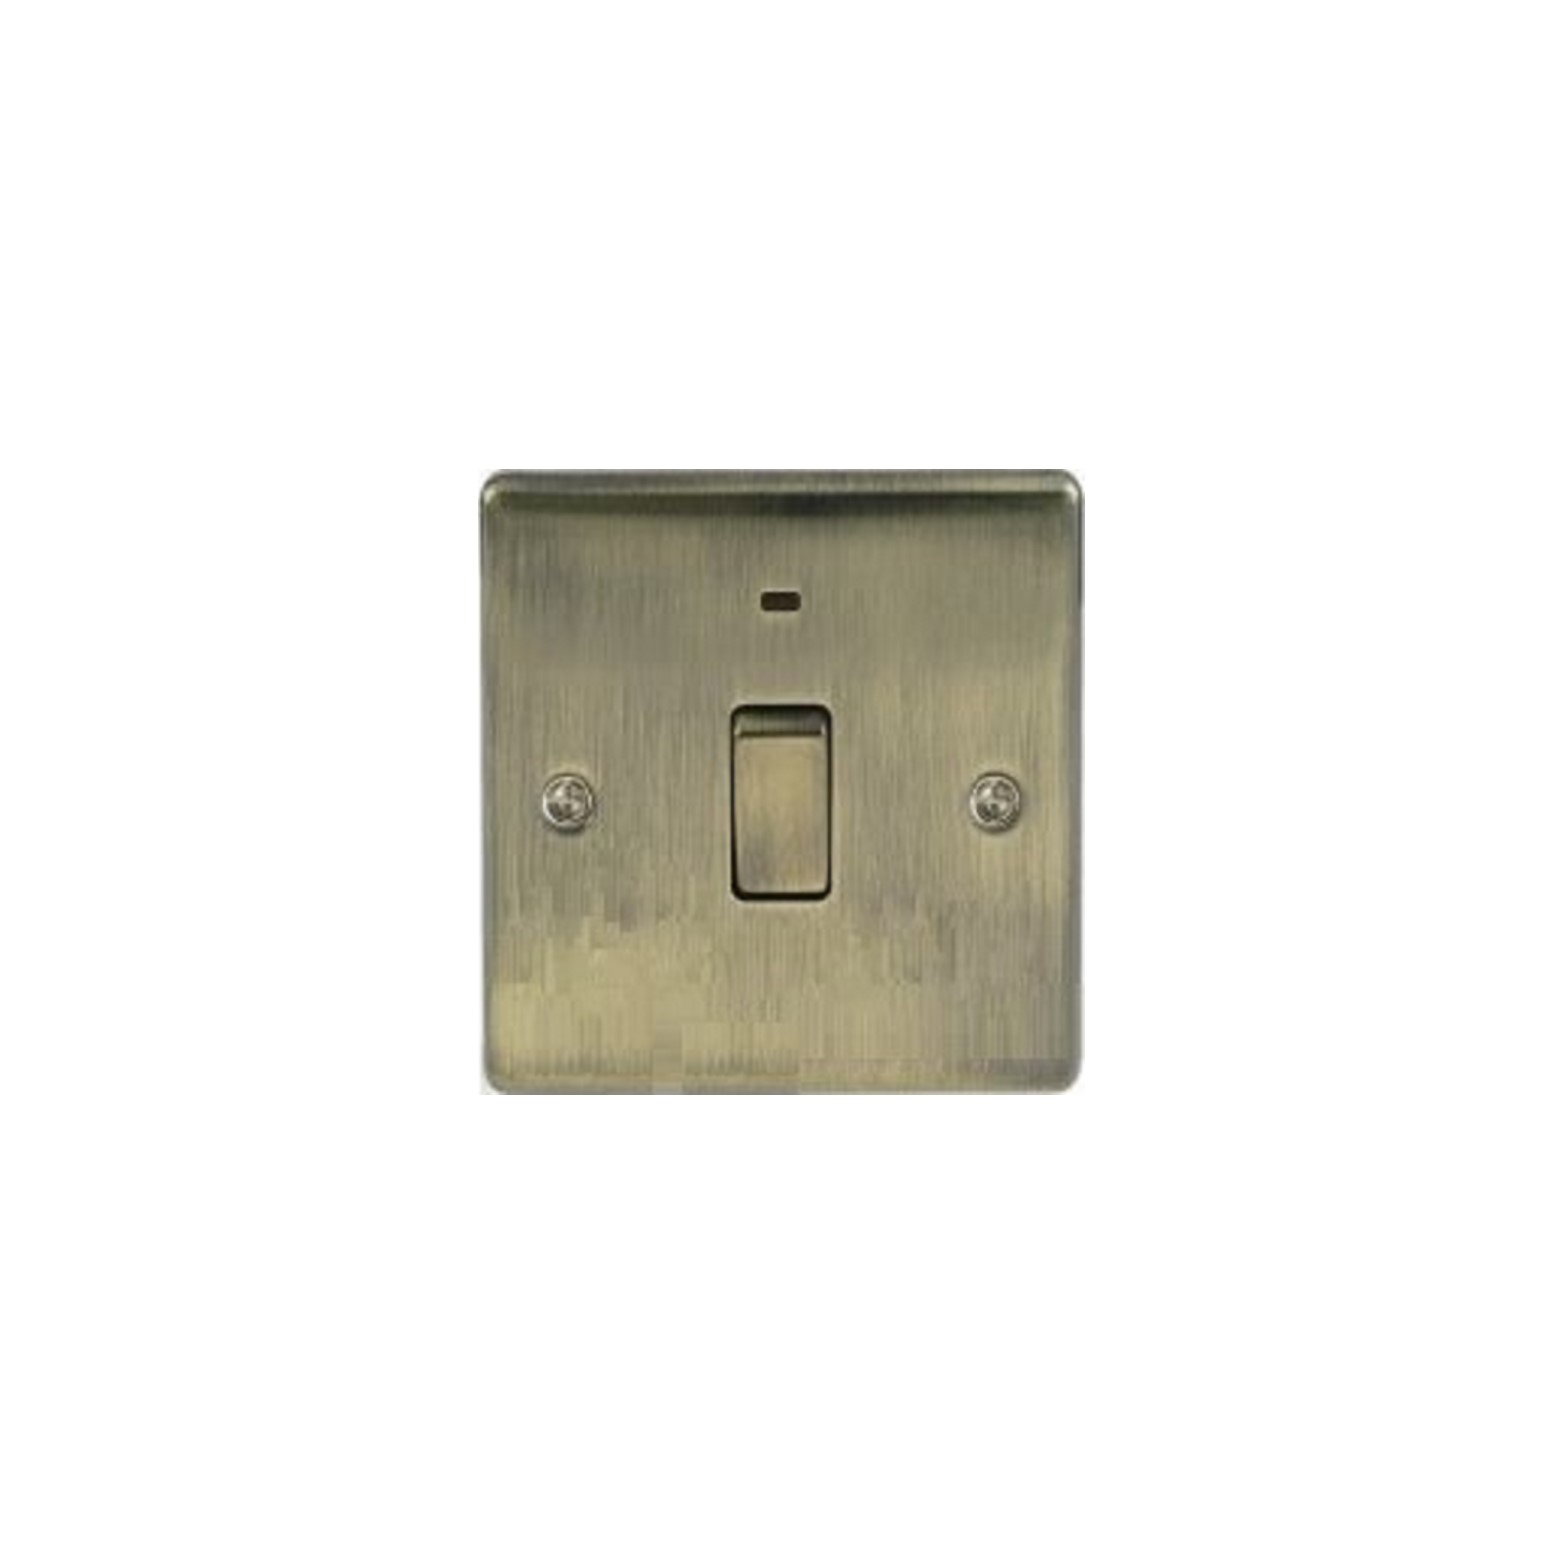 Nexus Antique Brass 20Amp Double Pole Switch, high power consumption metal frontplate (NAB31)